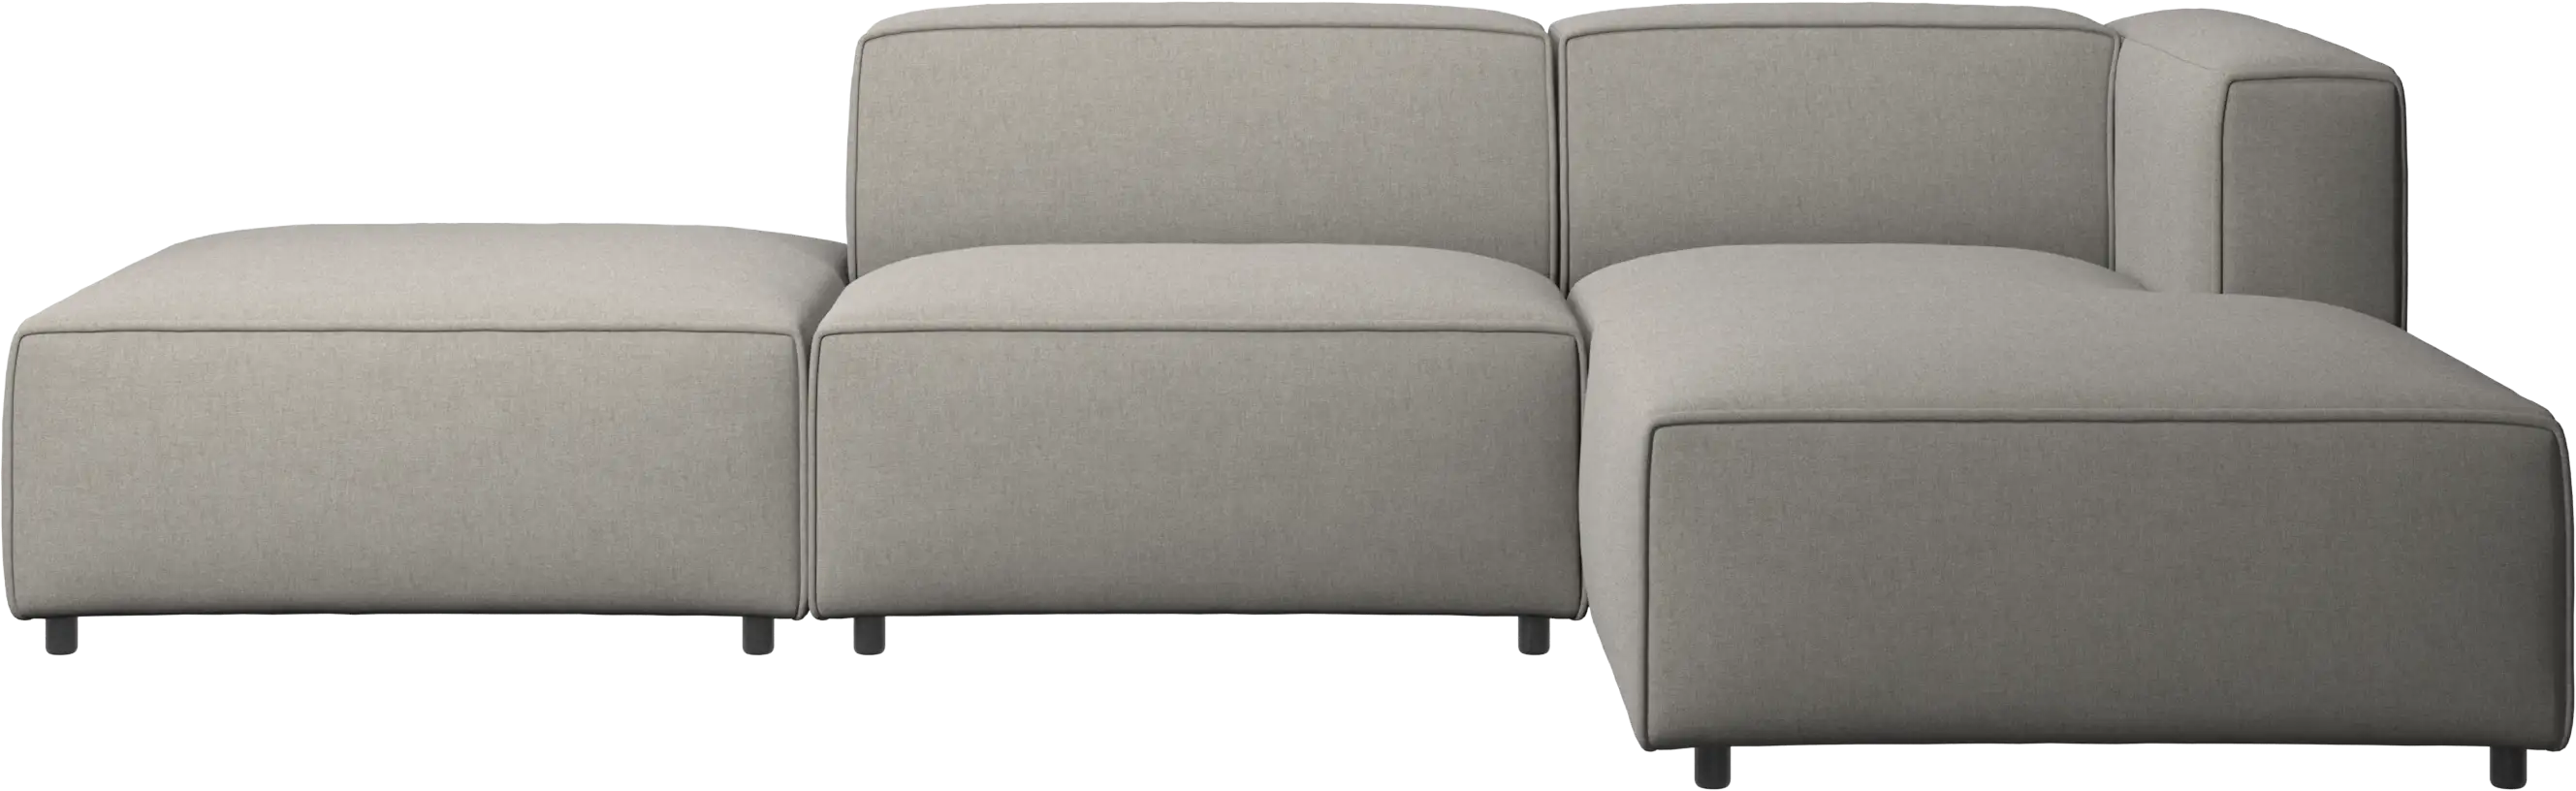 Carmo sofa with resting unit